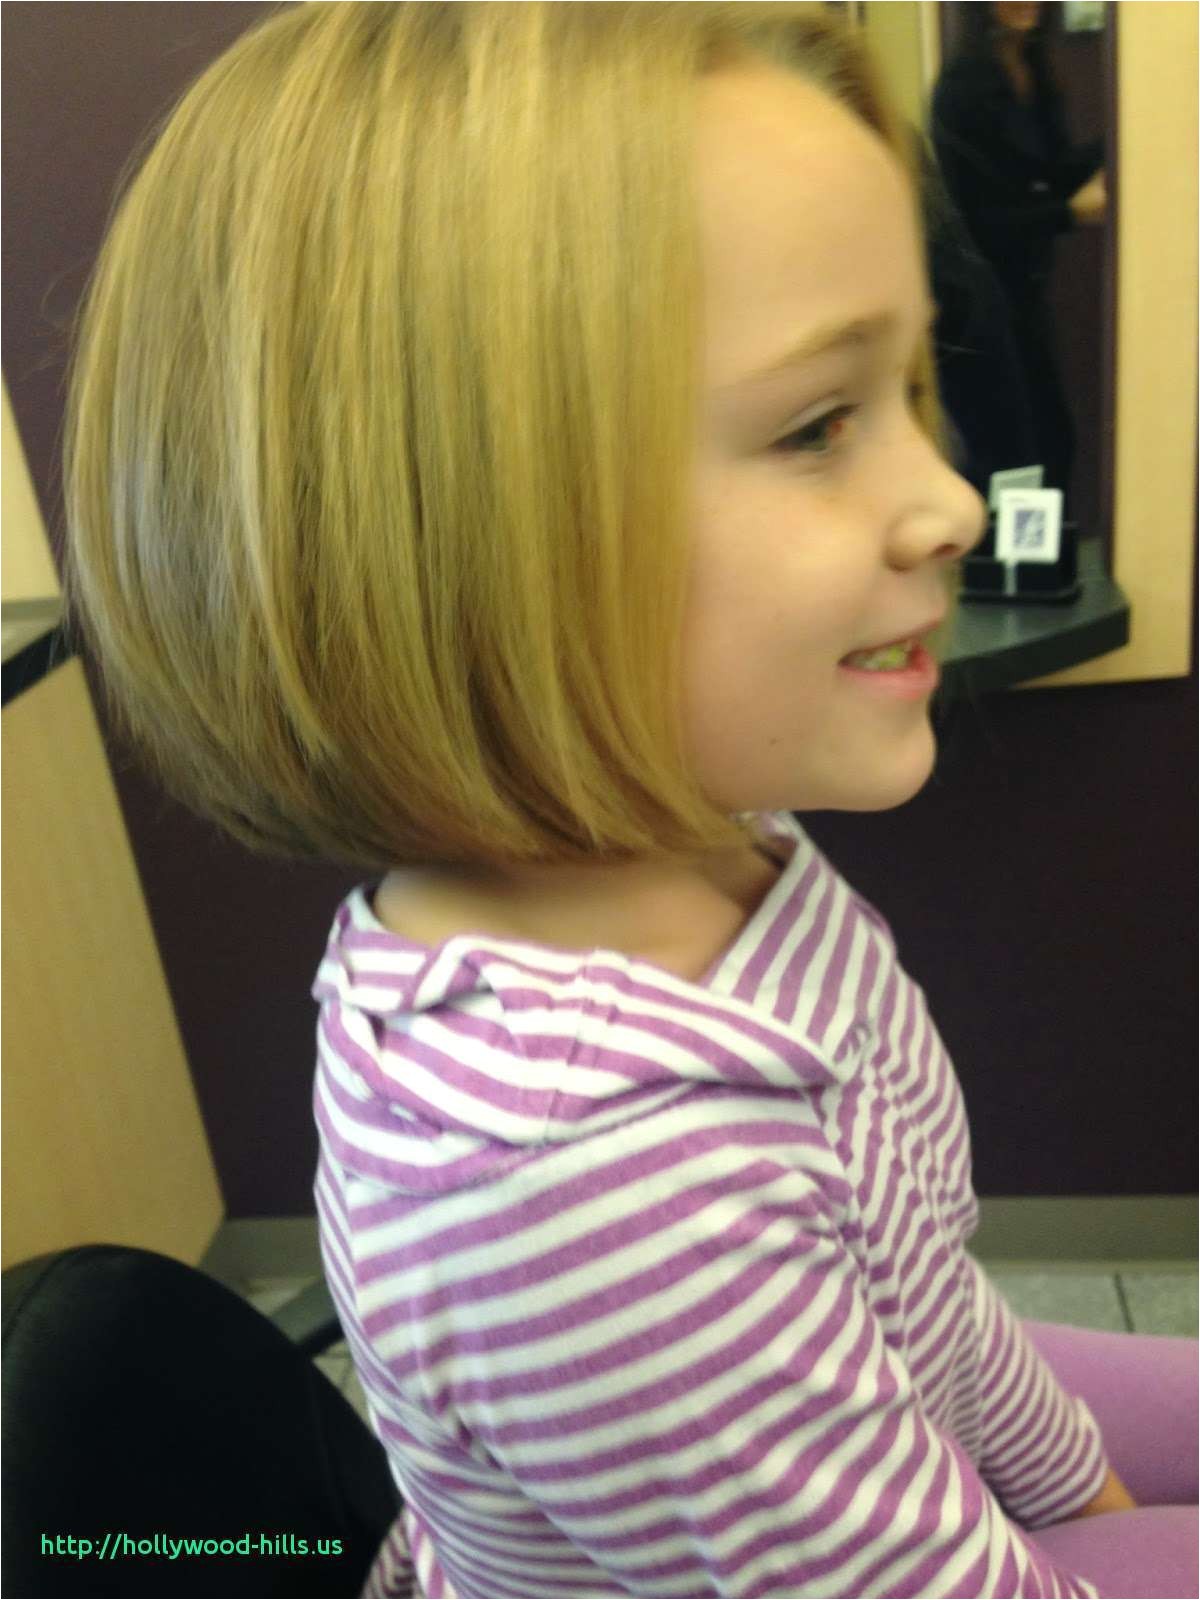 7 Year Old Girl Hairstyles Image Best Cute Hairstyles for 5 Year Olds with Short